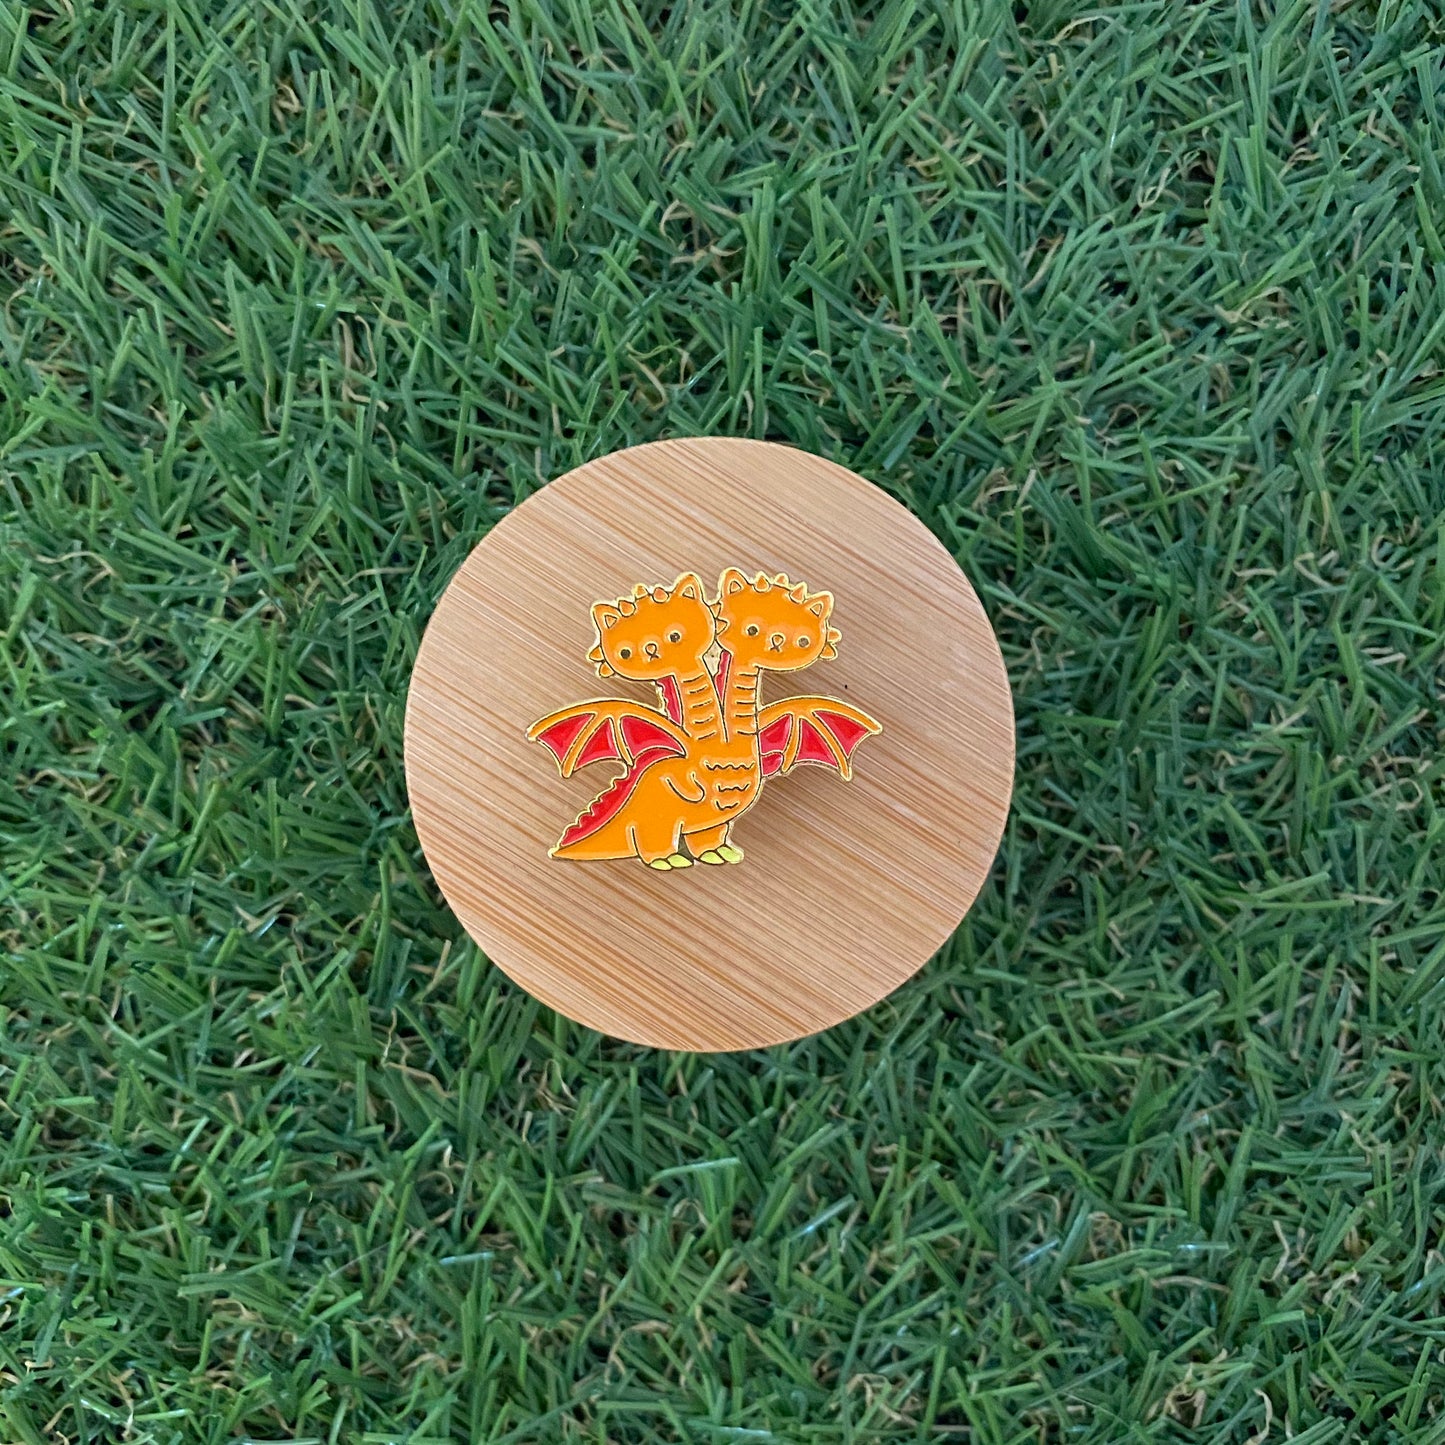 Fire and Ball the Two Headed Dragon Enamel Pin - thehappypin